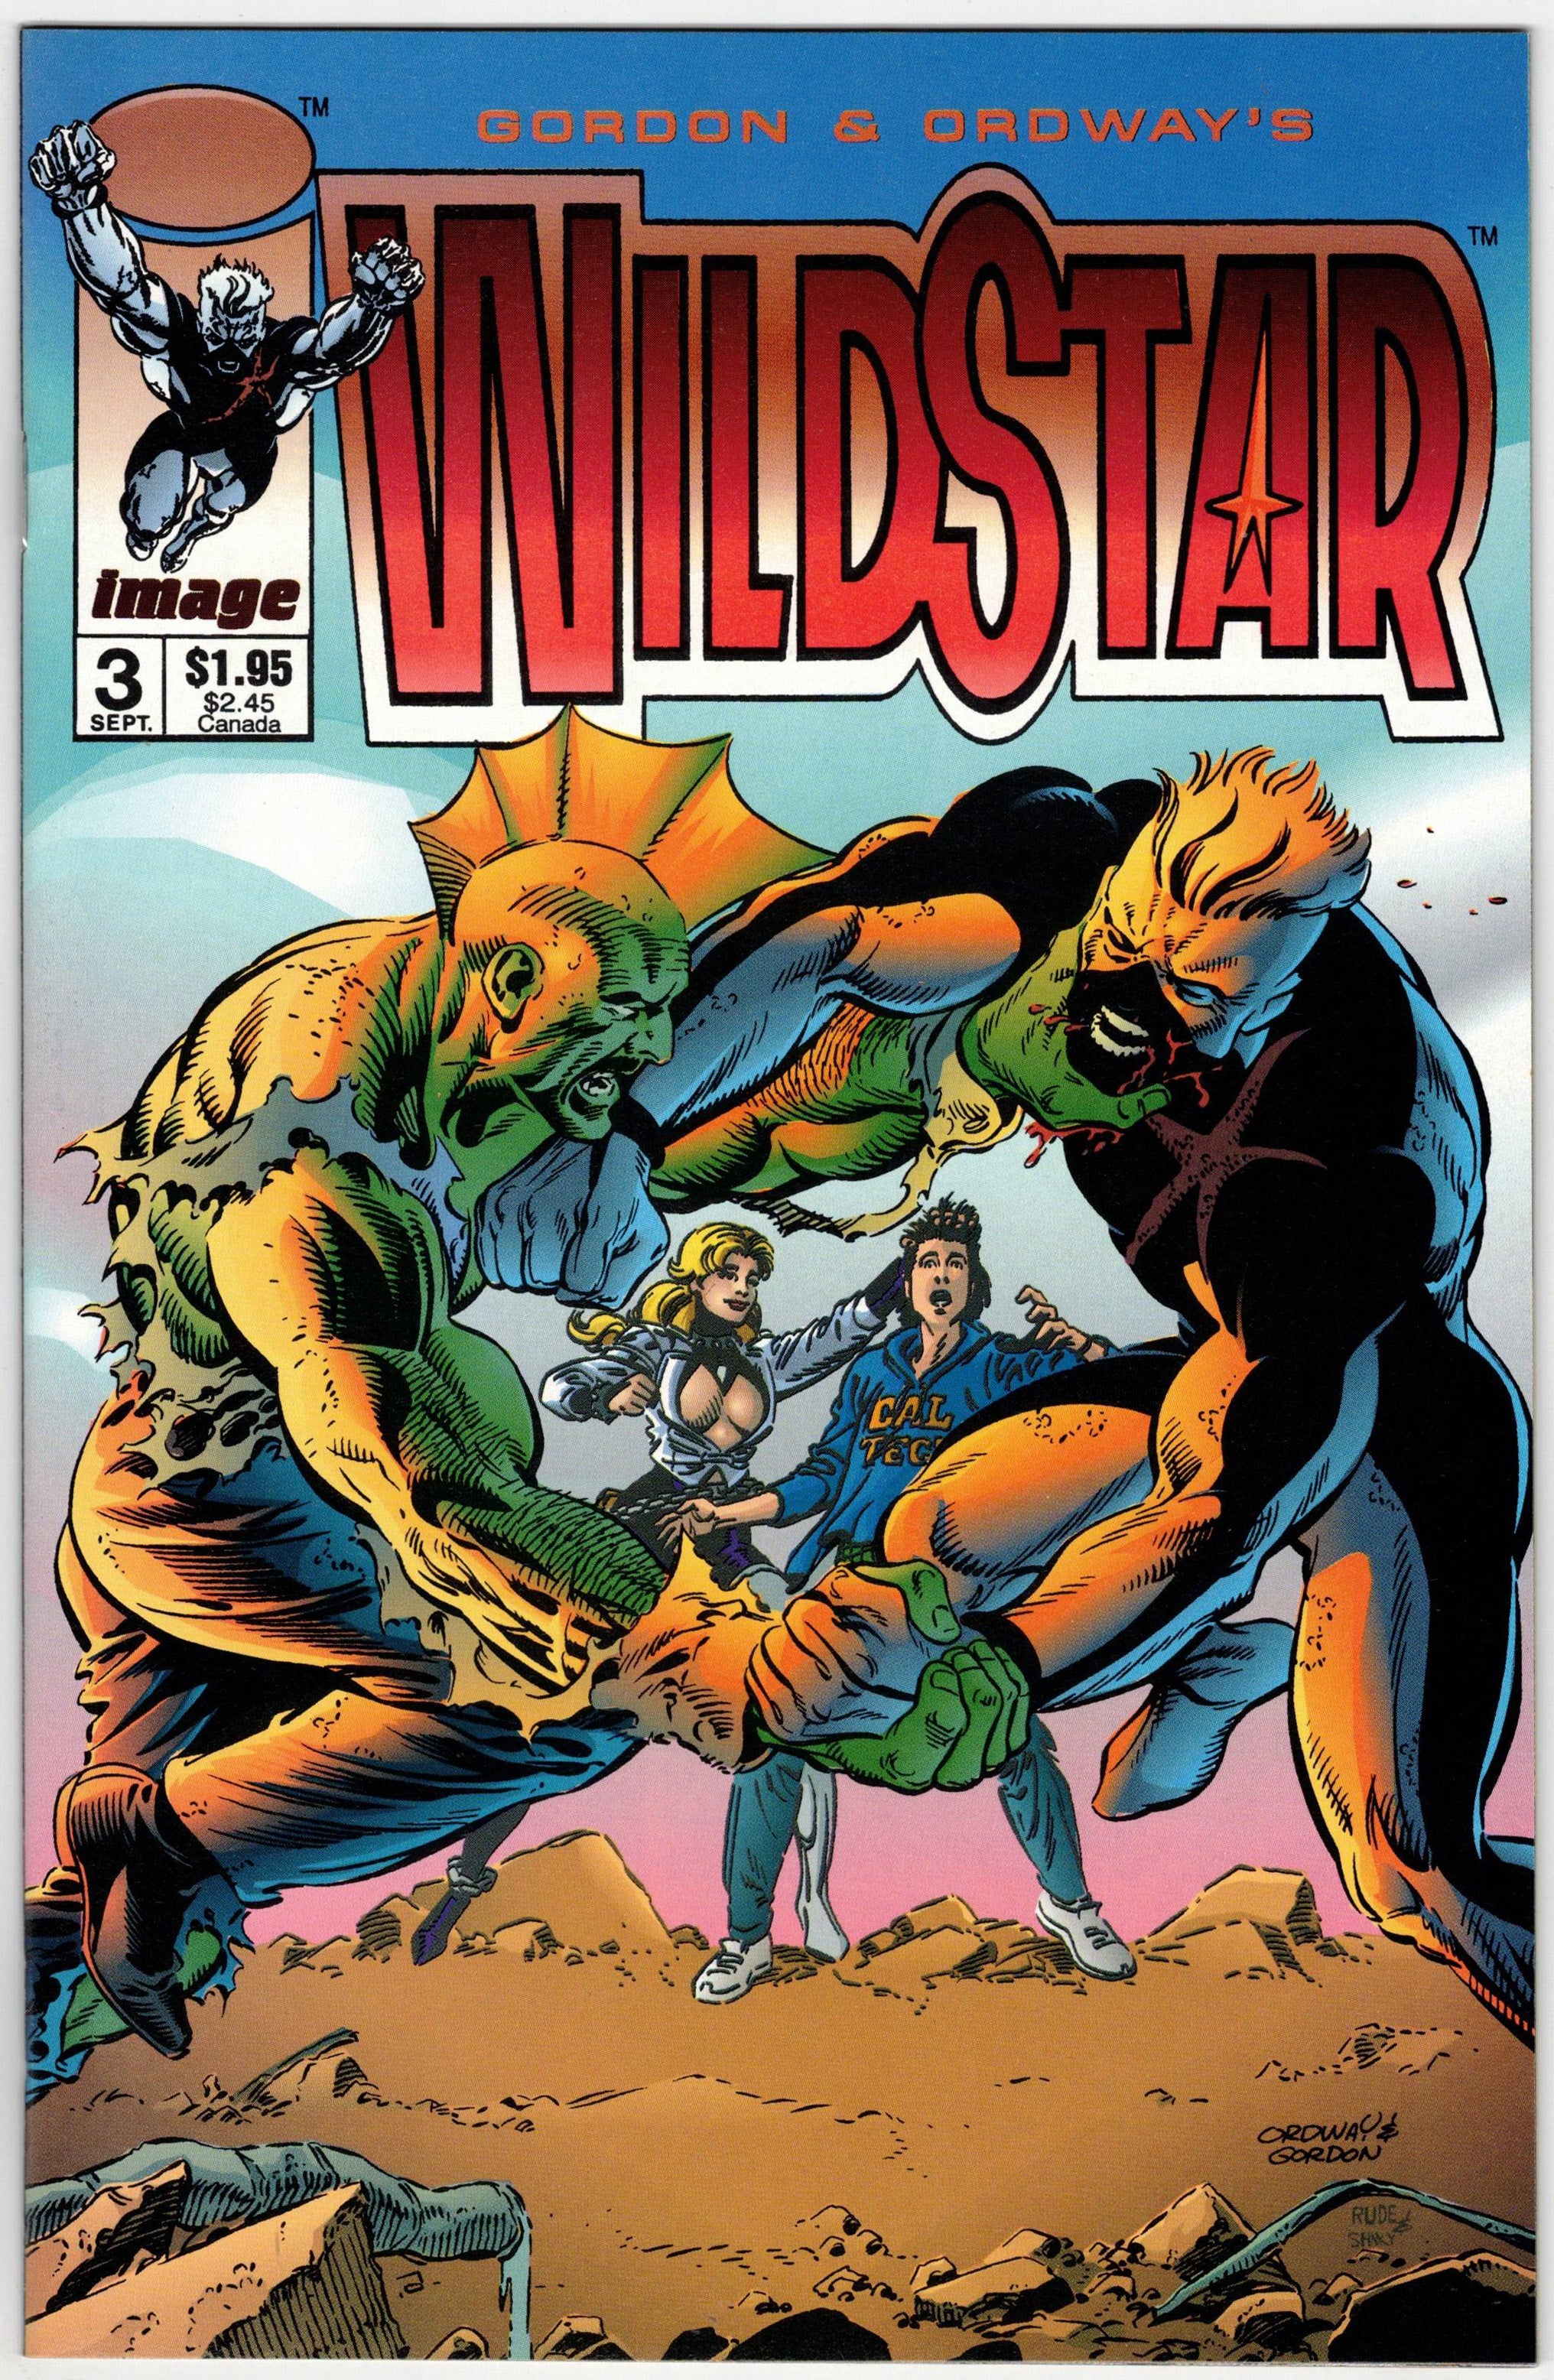 Photo of Wildstar: Sky Zero (1993) Issue 3 - Comic sold by Stronghold Collectibles